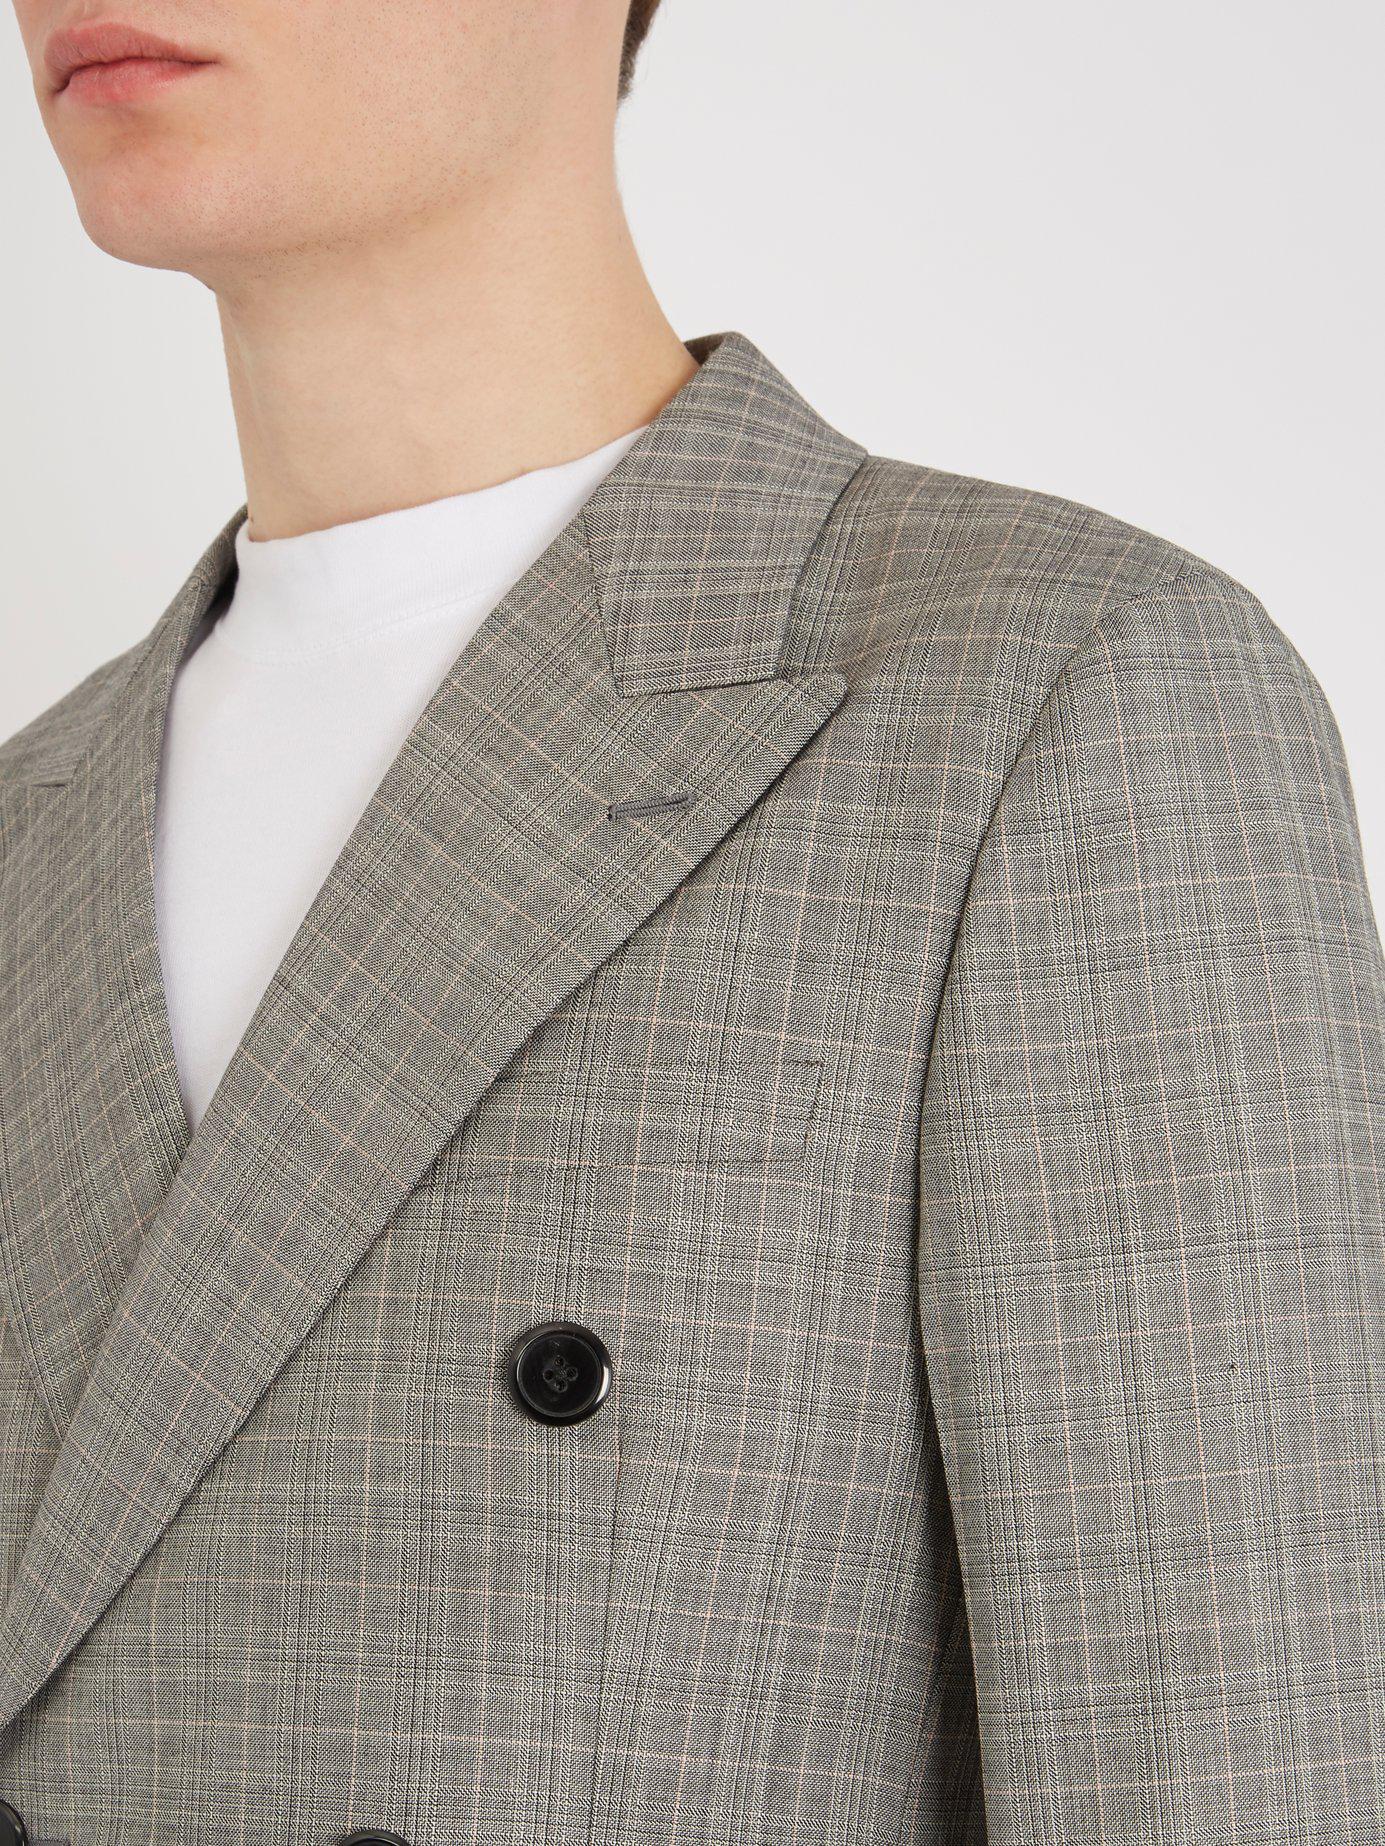 Prada Double Breasted Checked Wool Blend Blazer in Gray for Men - Lyst